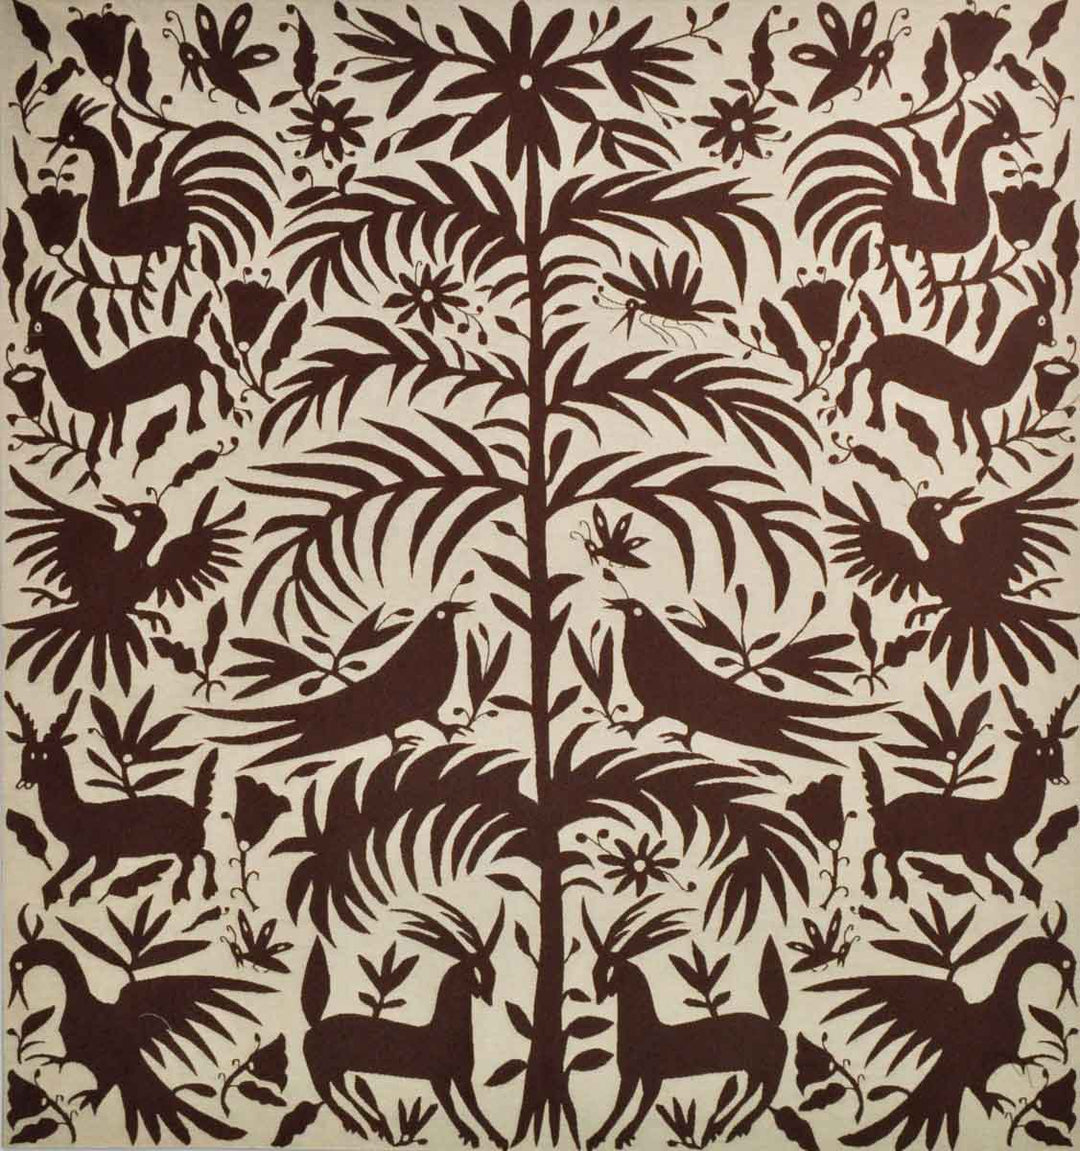 Otomi Earth tapestry